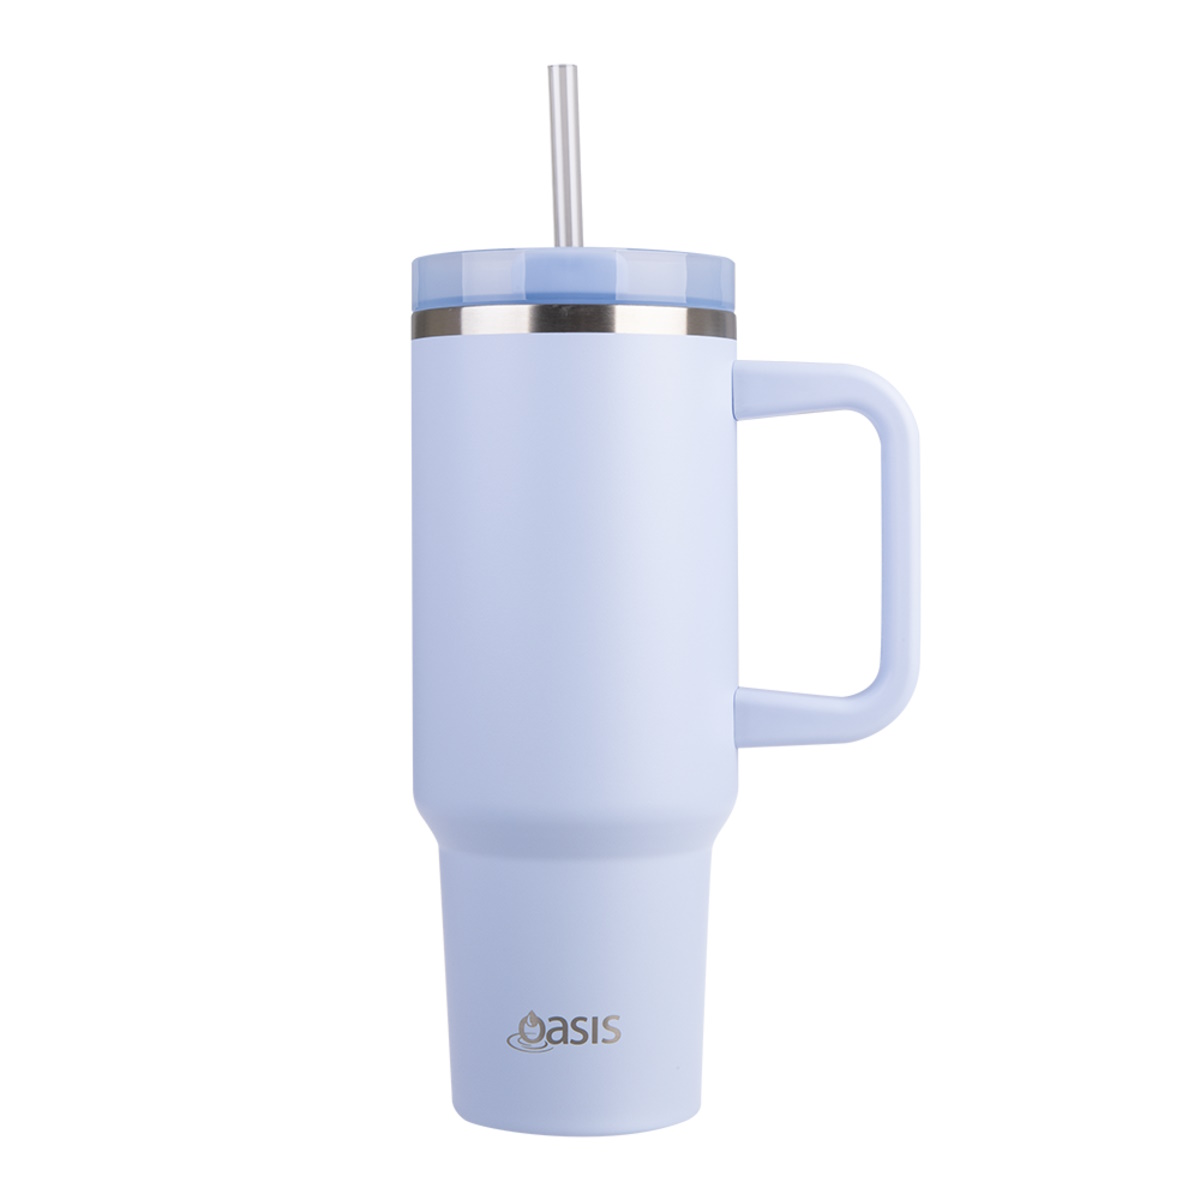 Oasis Stainless Steel Double Wall Insulated Commuter Travel Tumbler 1.2l PERIWINKLE